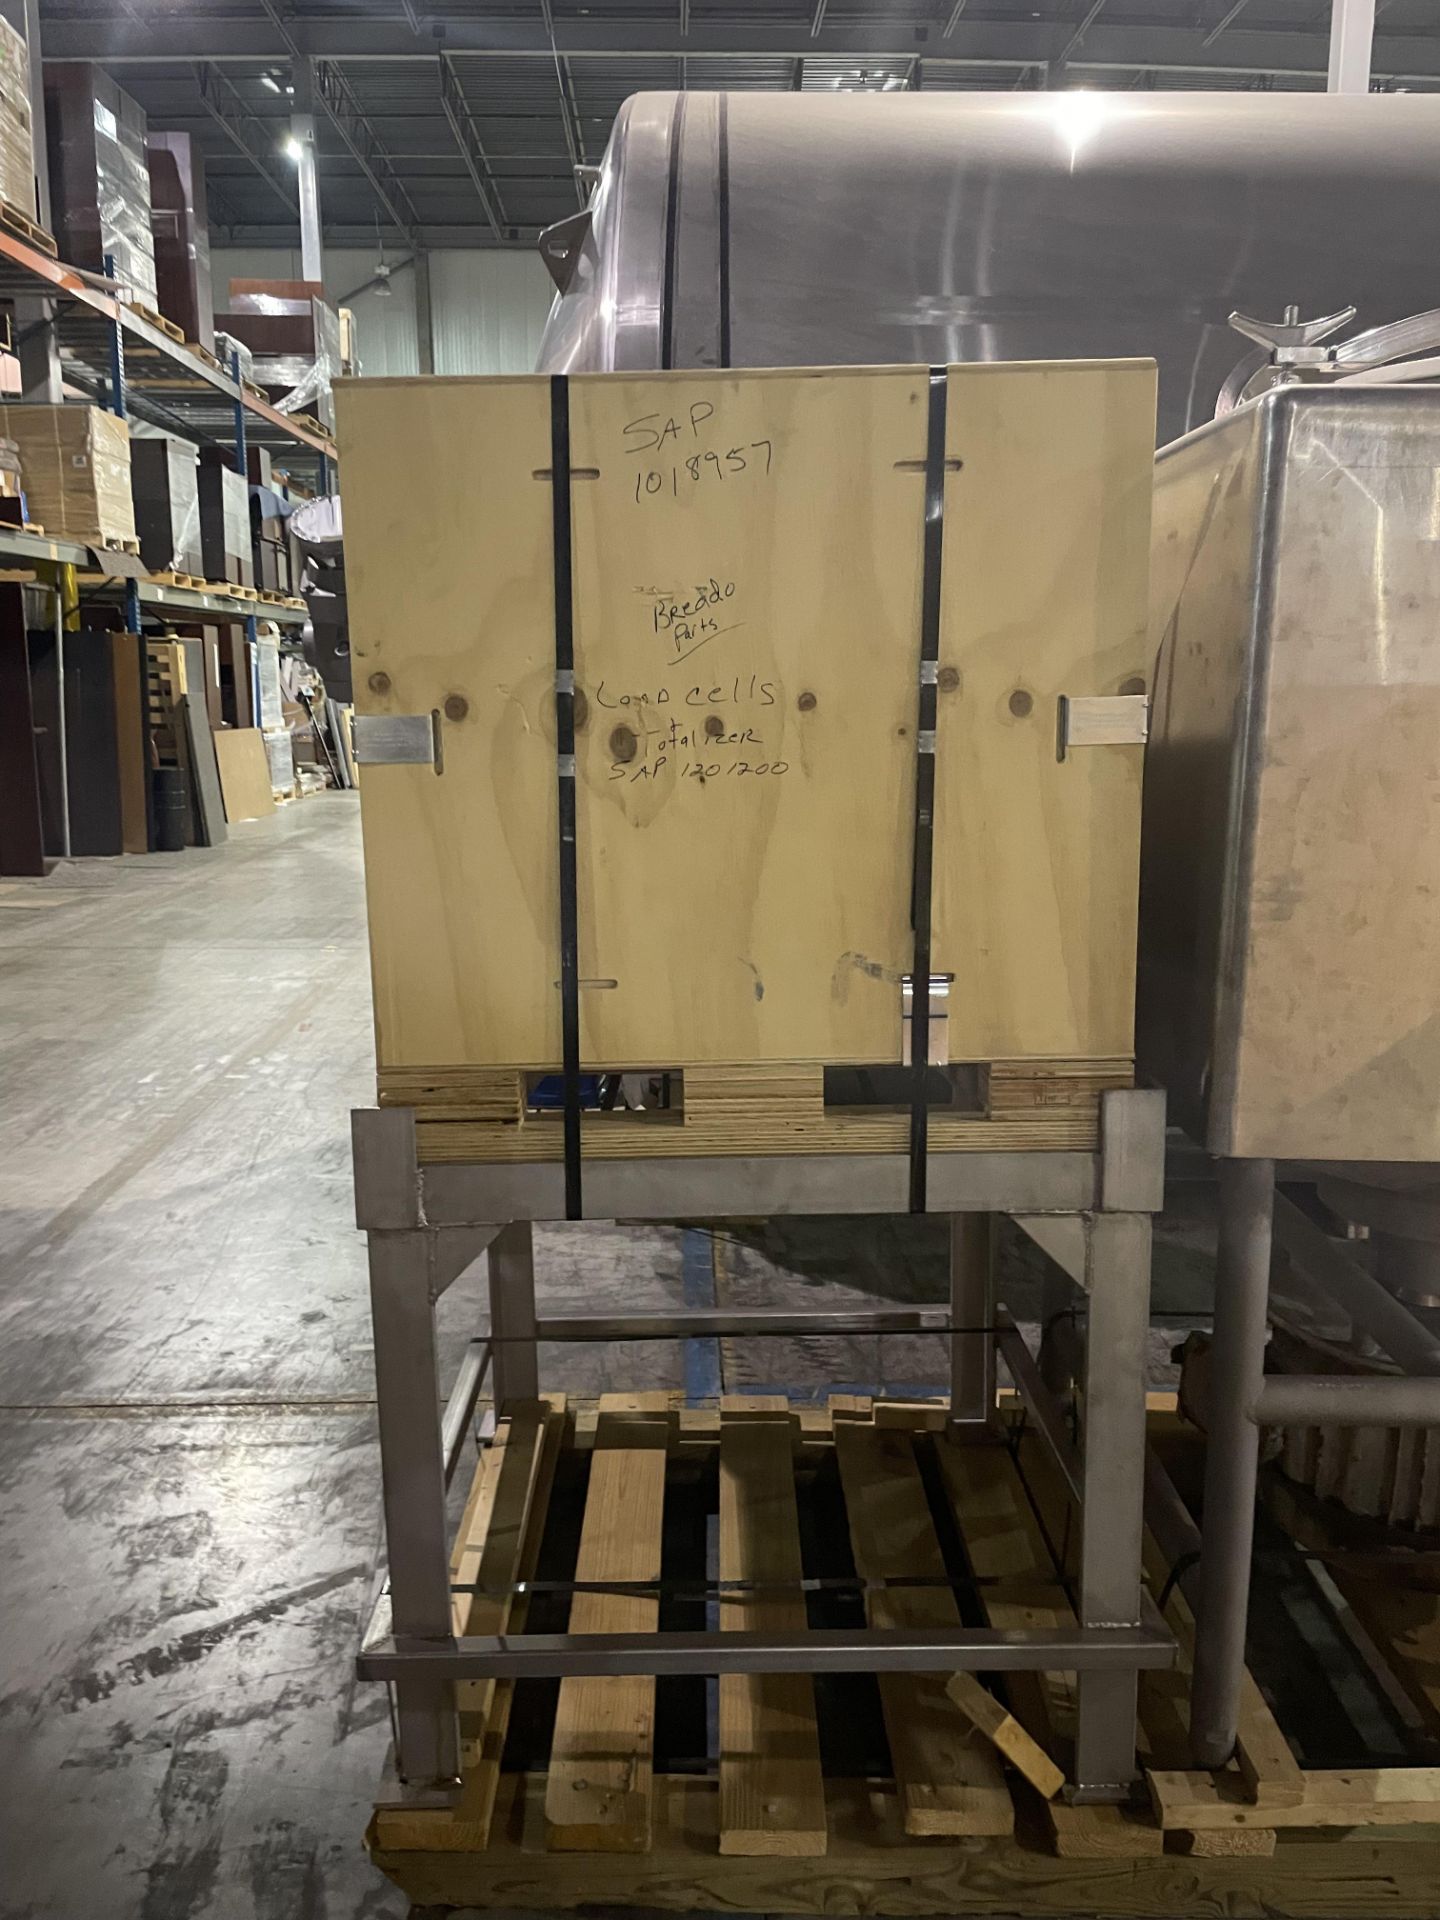 BREDDDO LIKWIFIER MODEL LDT 200 GALLON WITH LOAD CELLS RIGGING/LOADING FEE - $100 - Image 3 of 5